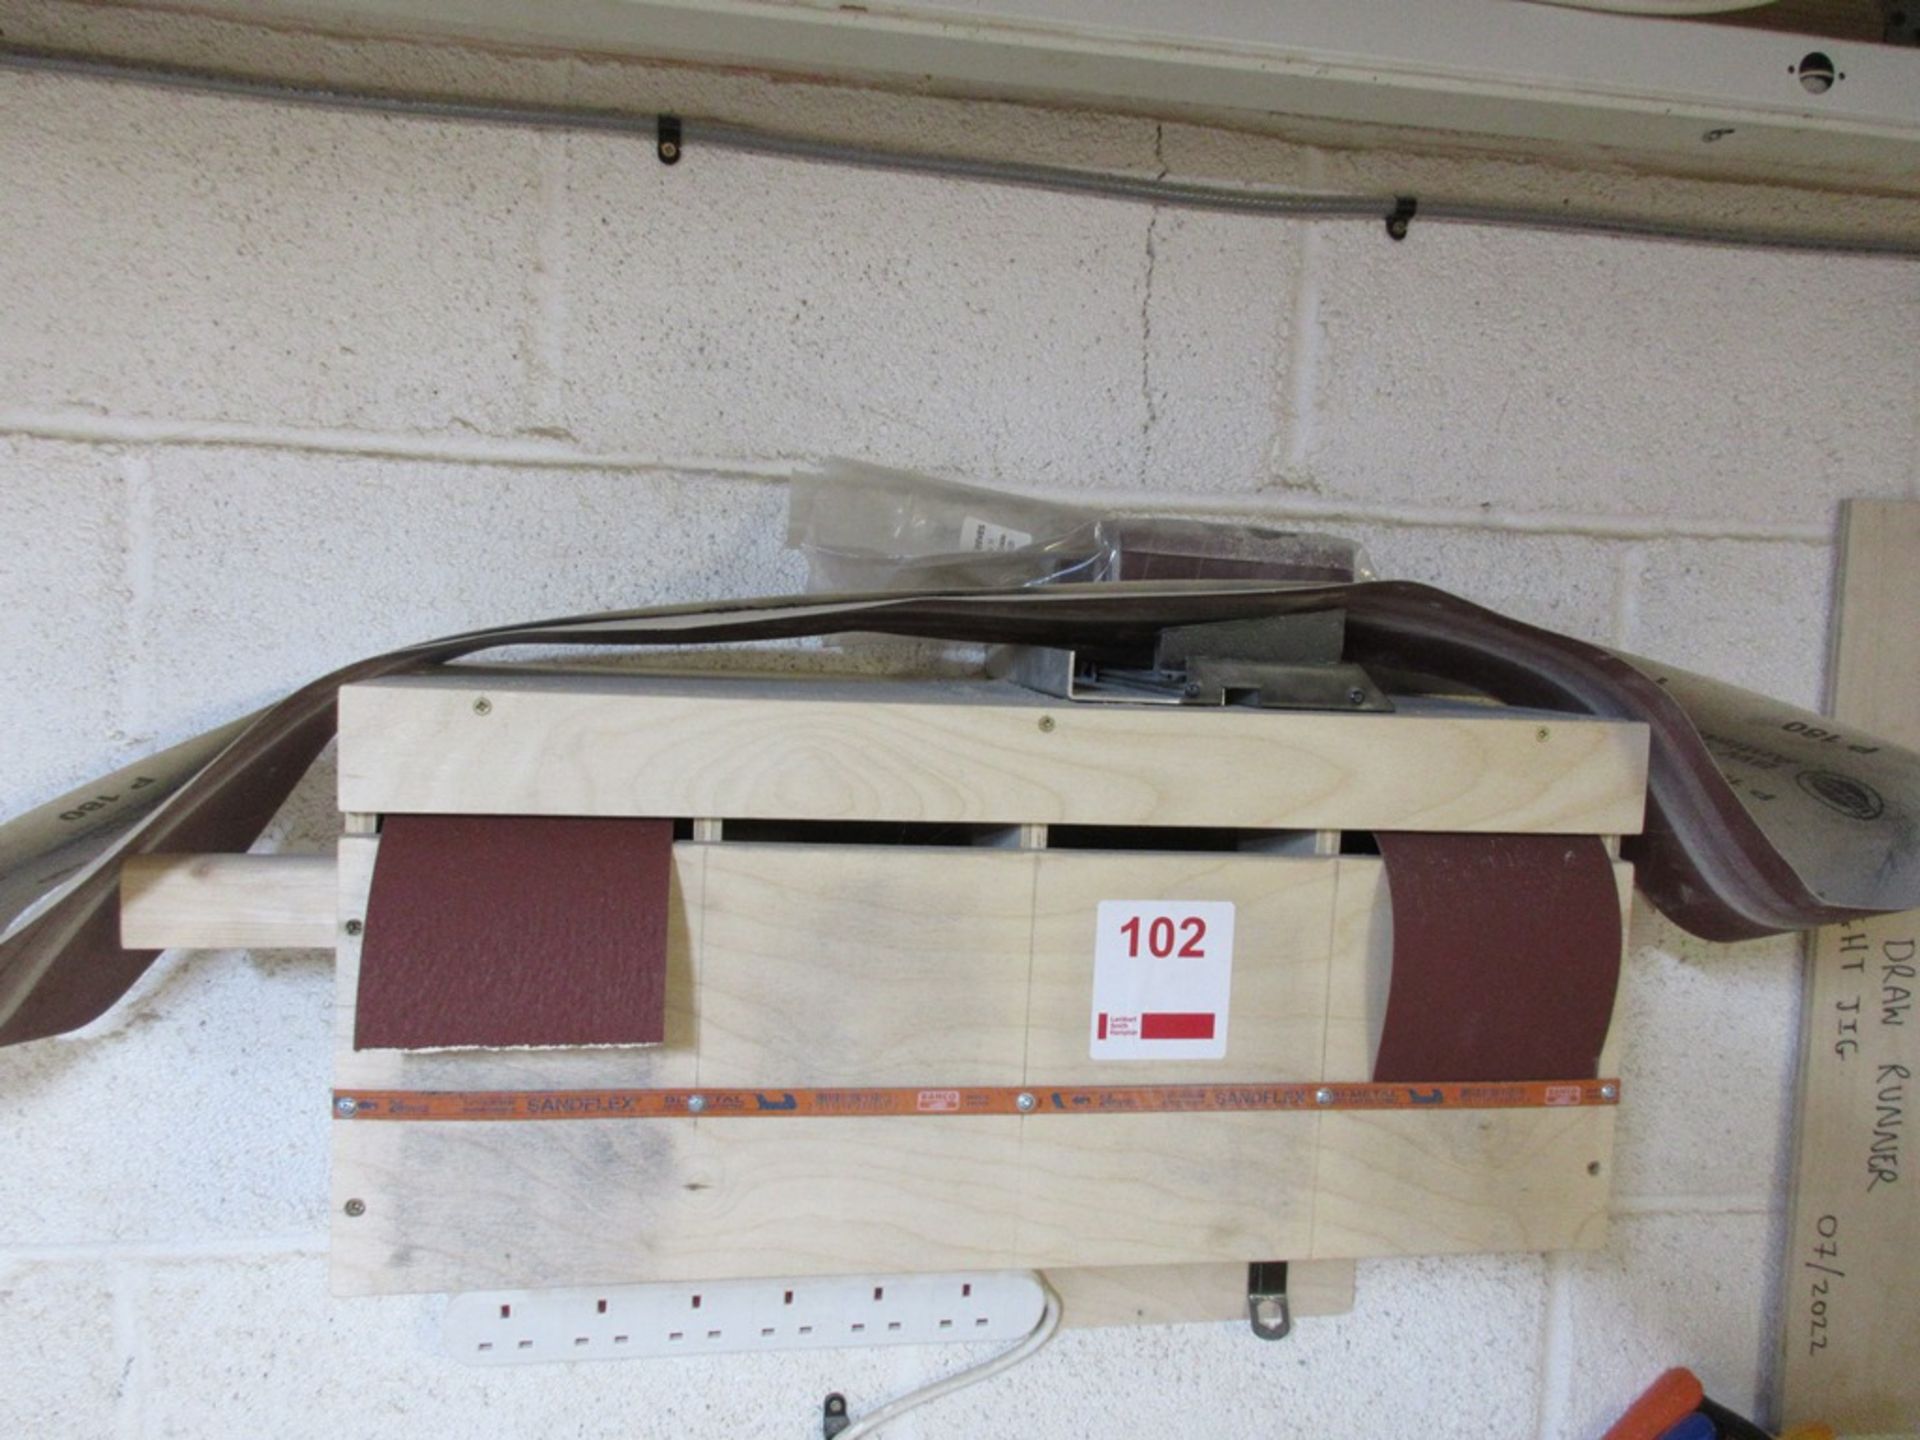 Bespoke sand paper dispenser with contents of cupboard including assorted sand paper and bespoke